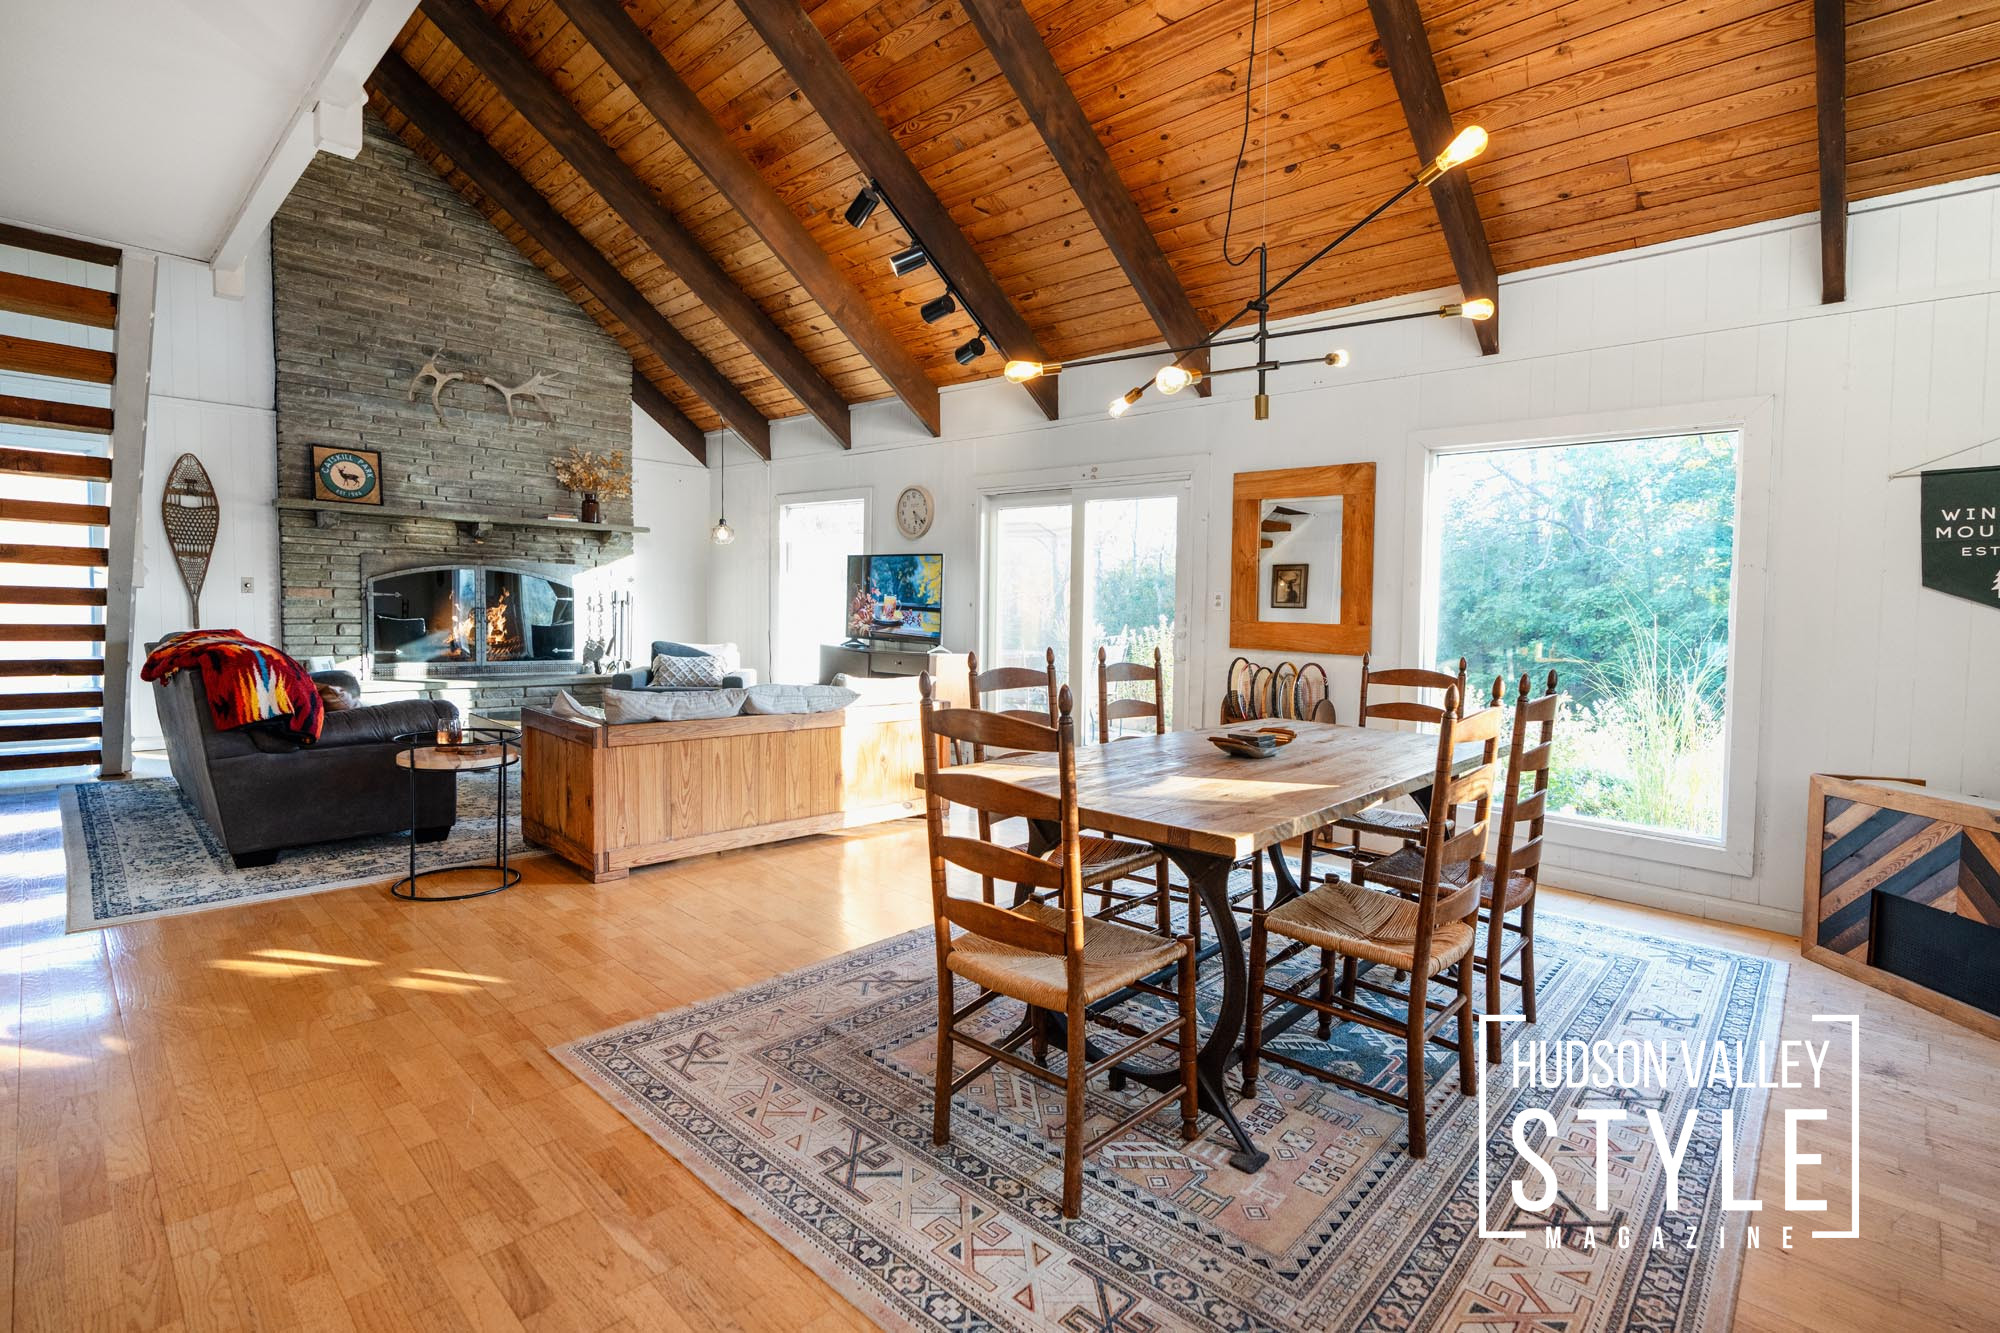 Catskills Cabin Living: Combining Rustic Charm with Modern Amenities - Experience the Best of Both Worlds – Presented by Alluvion Vacations